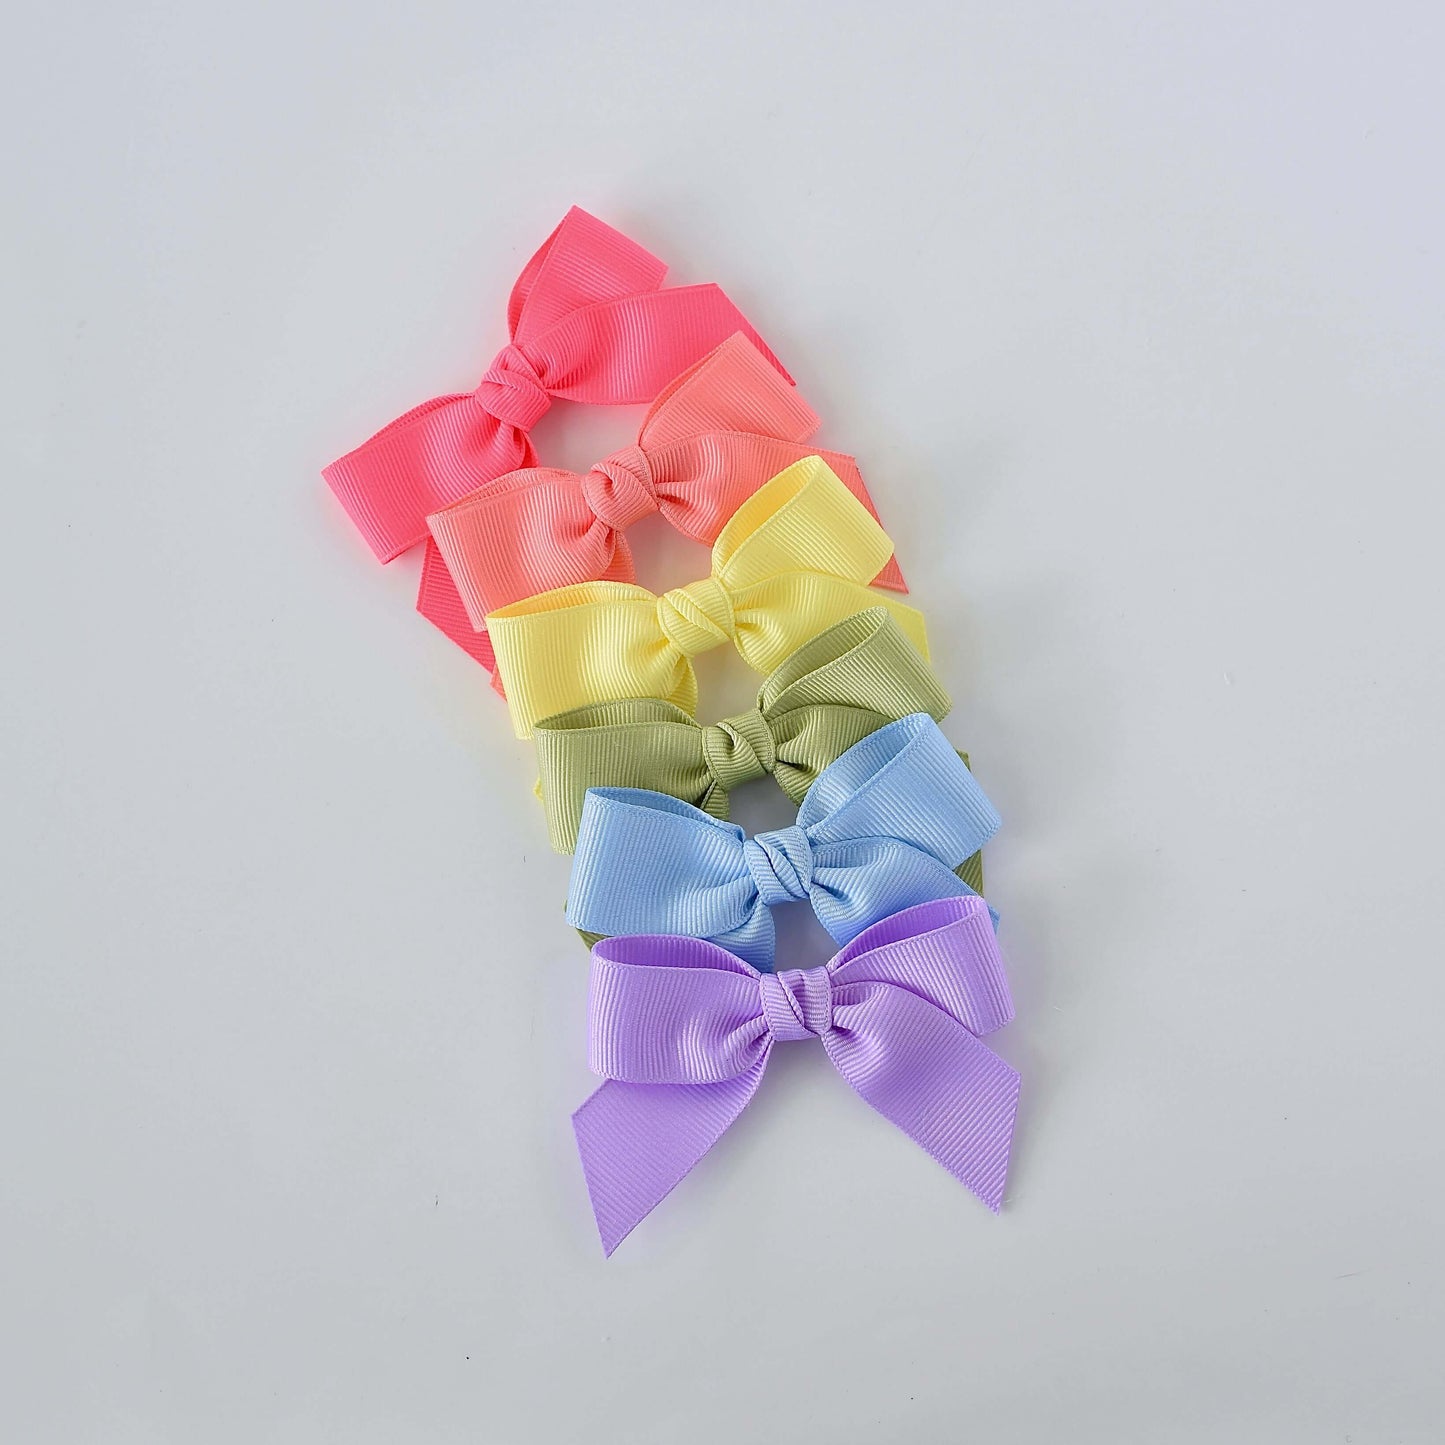 Pastel grosgrain Sailor bow clips and headbands in pink, orange, yellow, green, blue, and purple for newborns to young girls